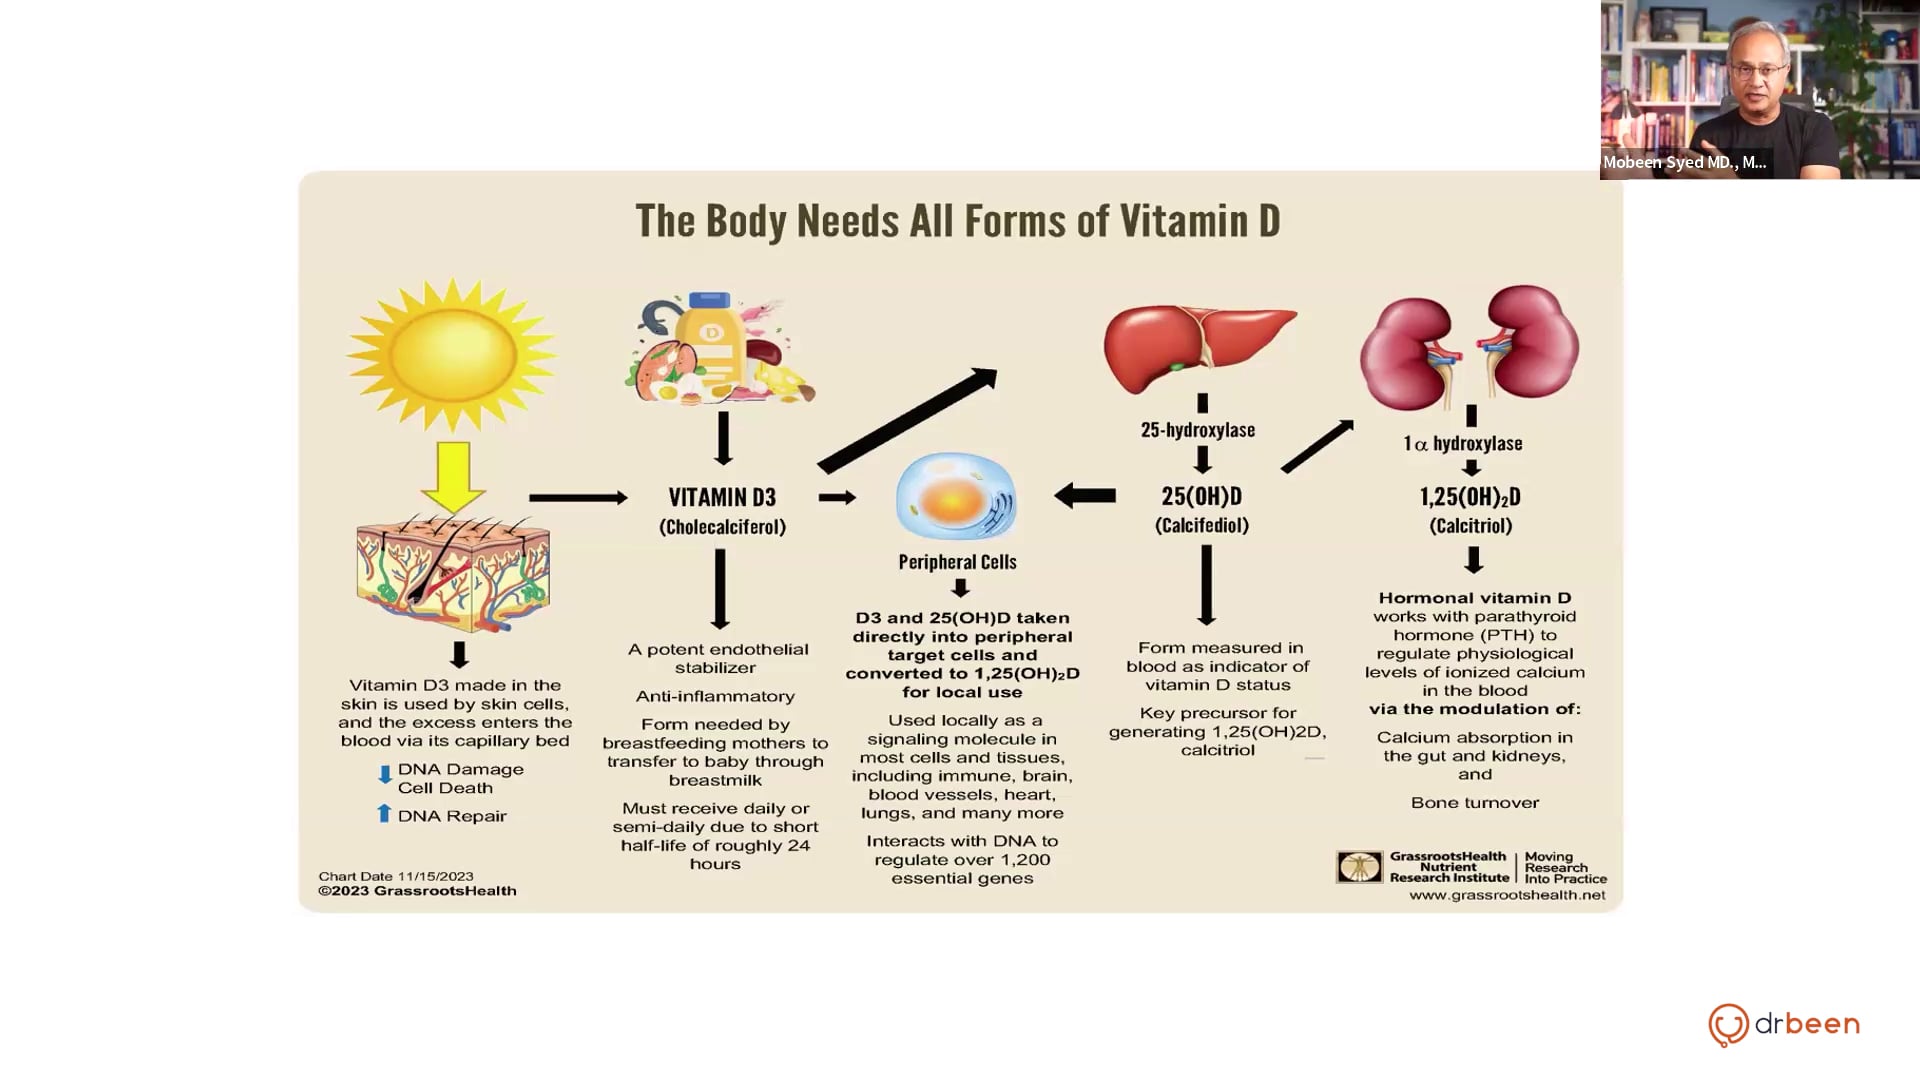 Vitamin D is Important for Our Health (Vitamin D Part 1)